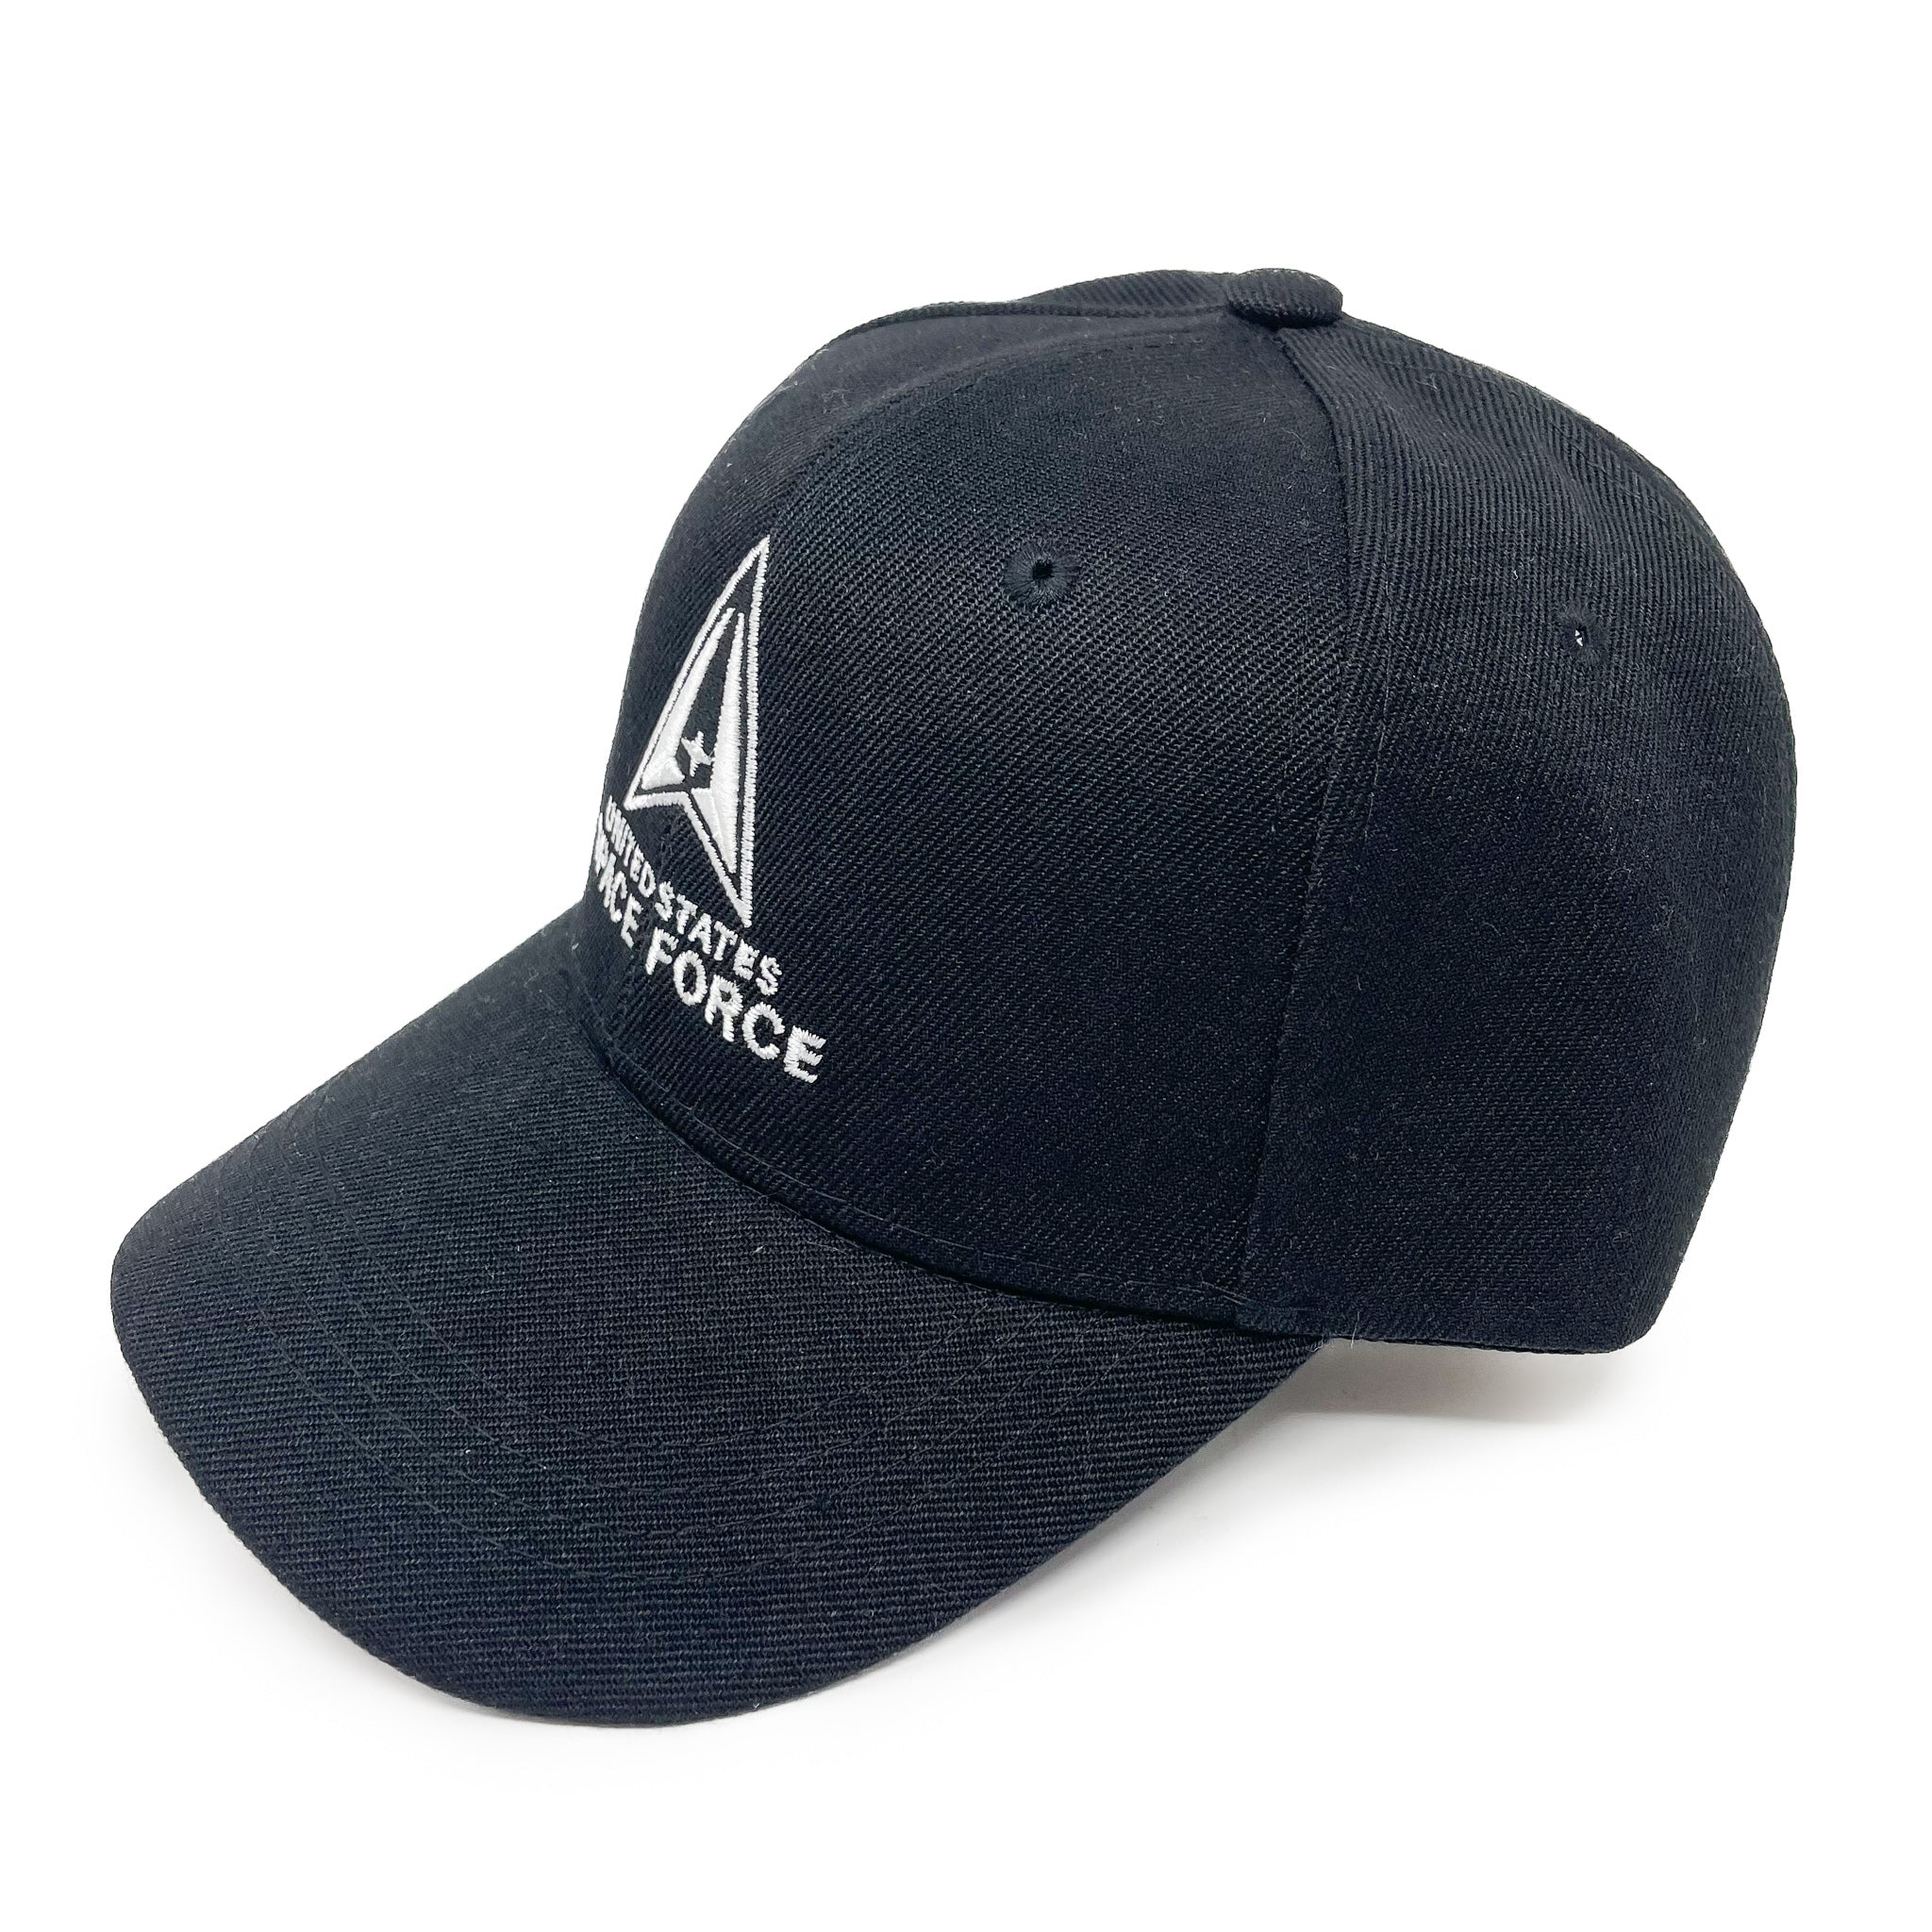 United States Space Force Hat